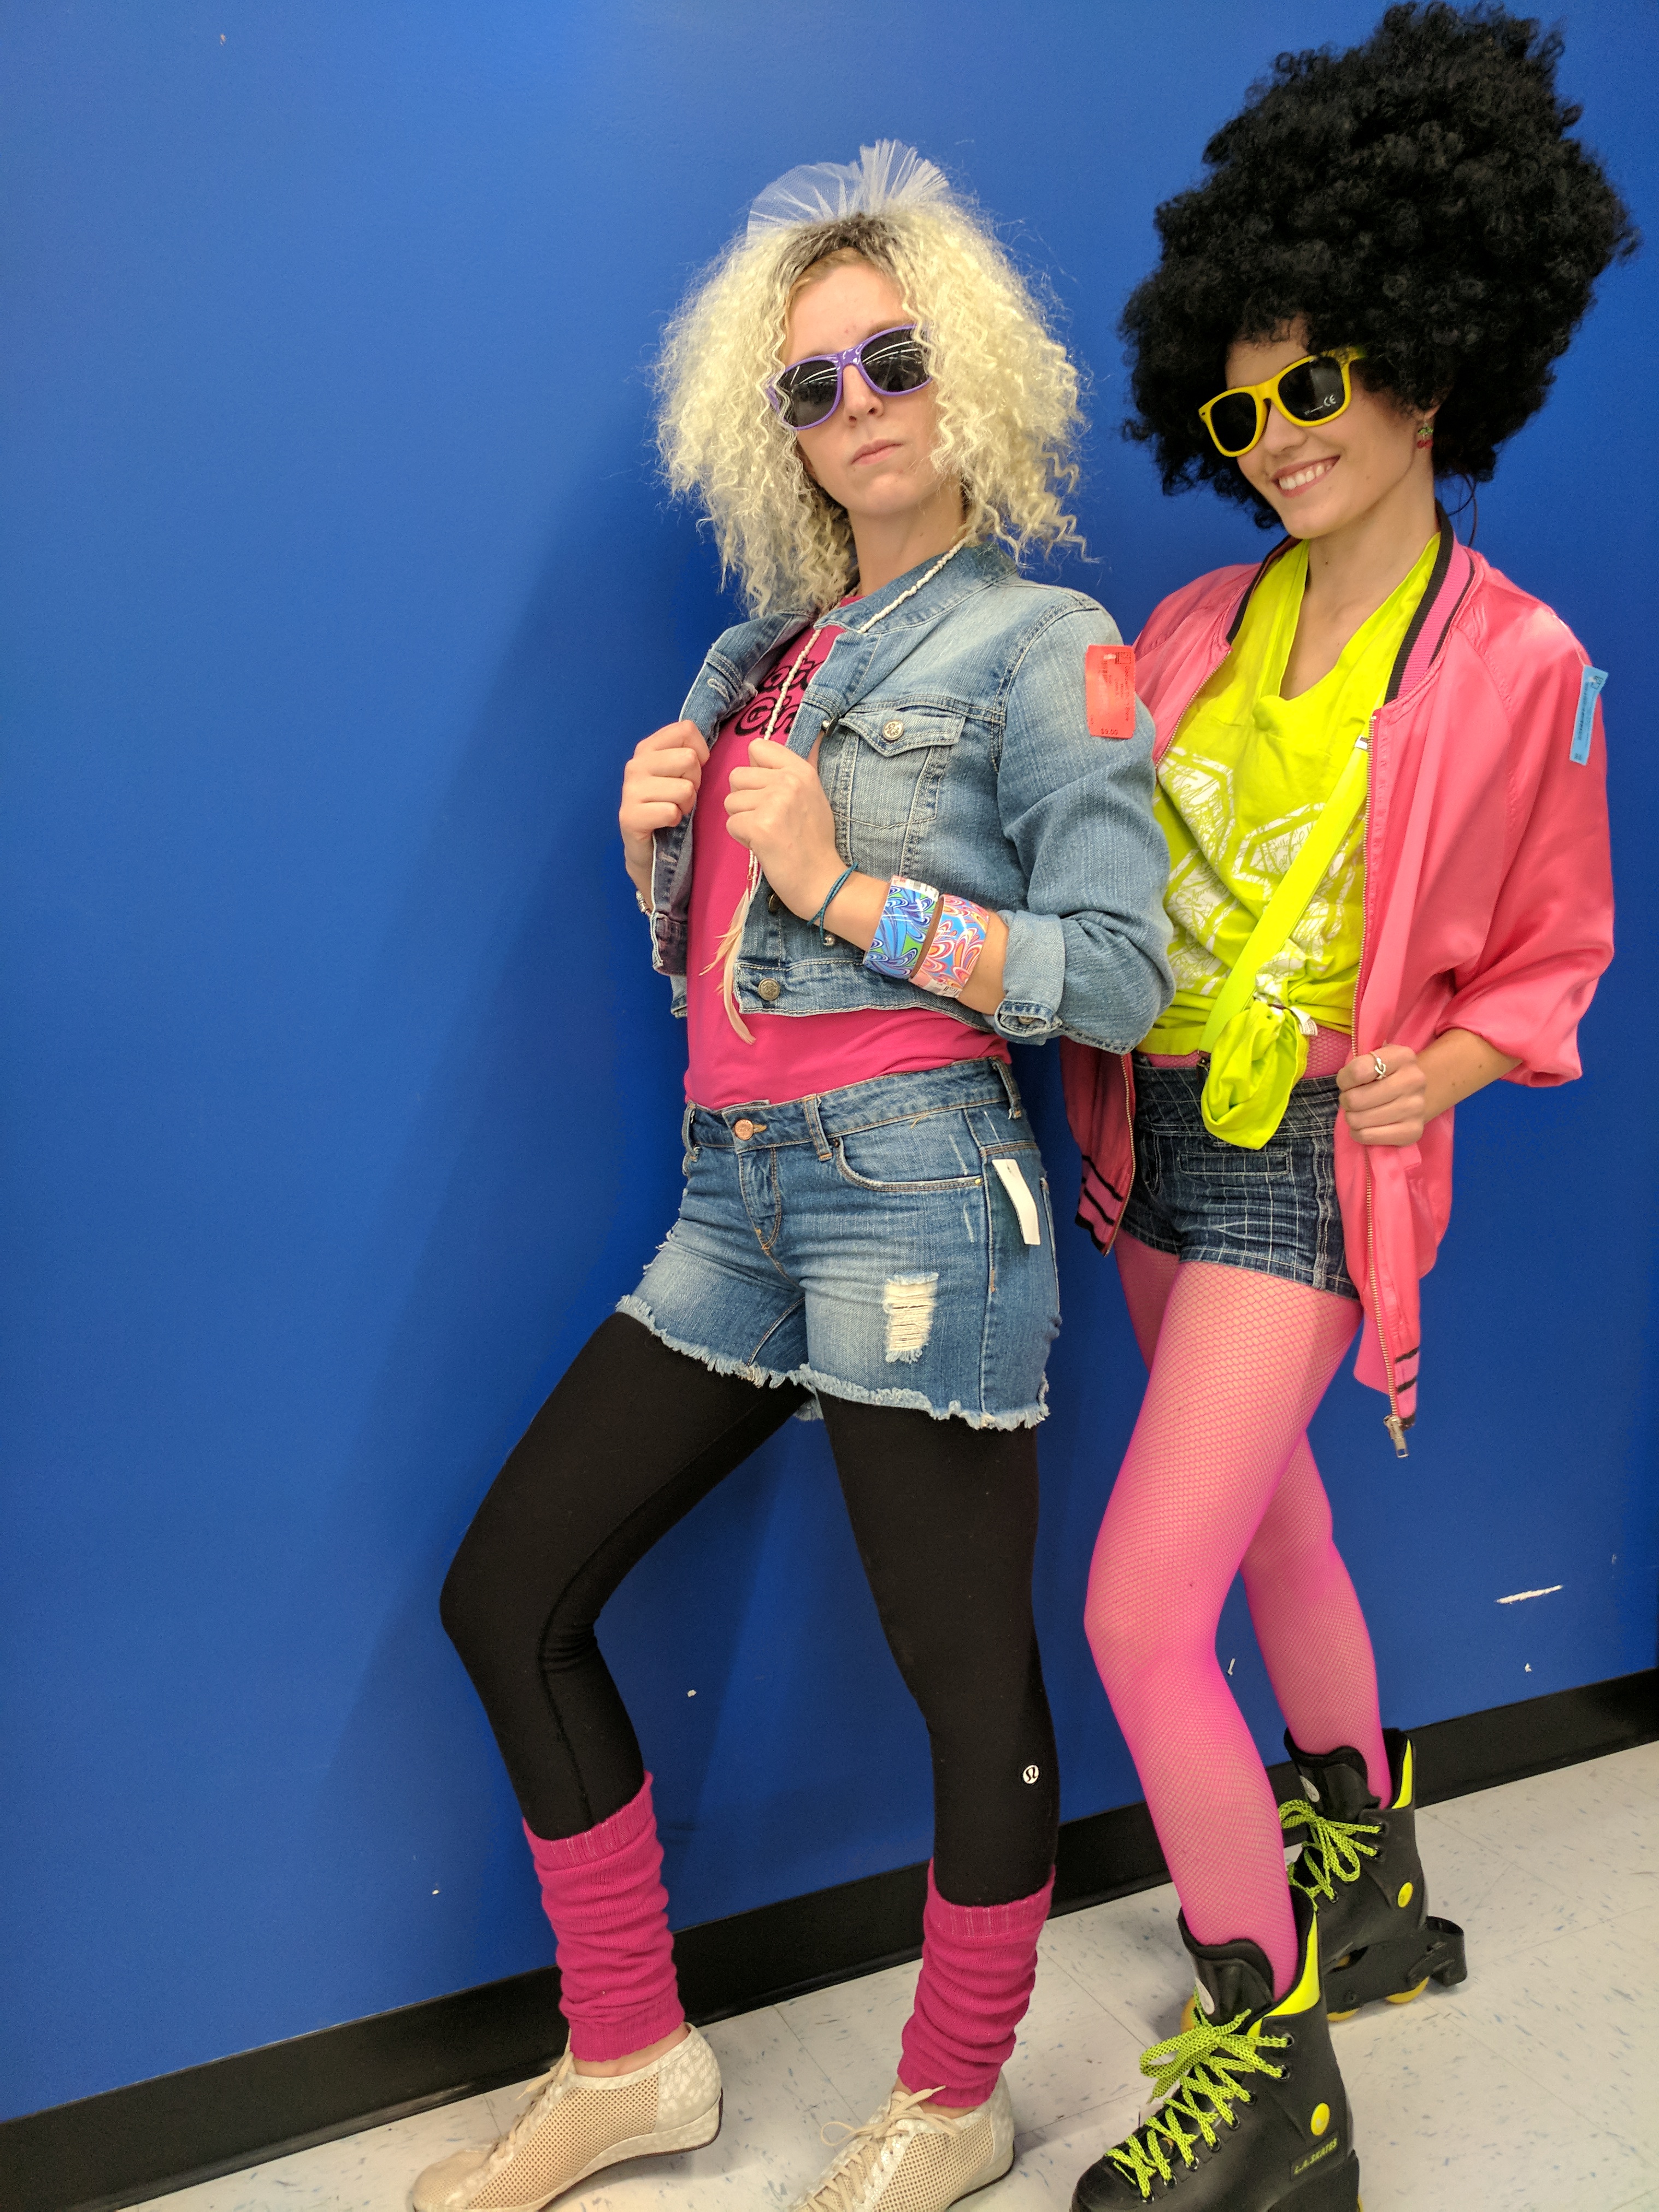 The 80s Fashion Look for Halloween Goodwill Industries of Alberta